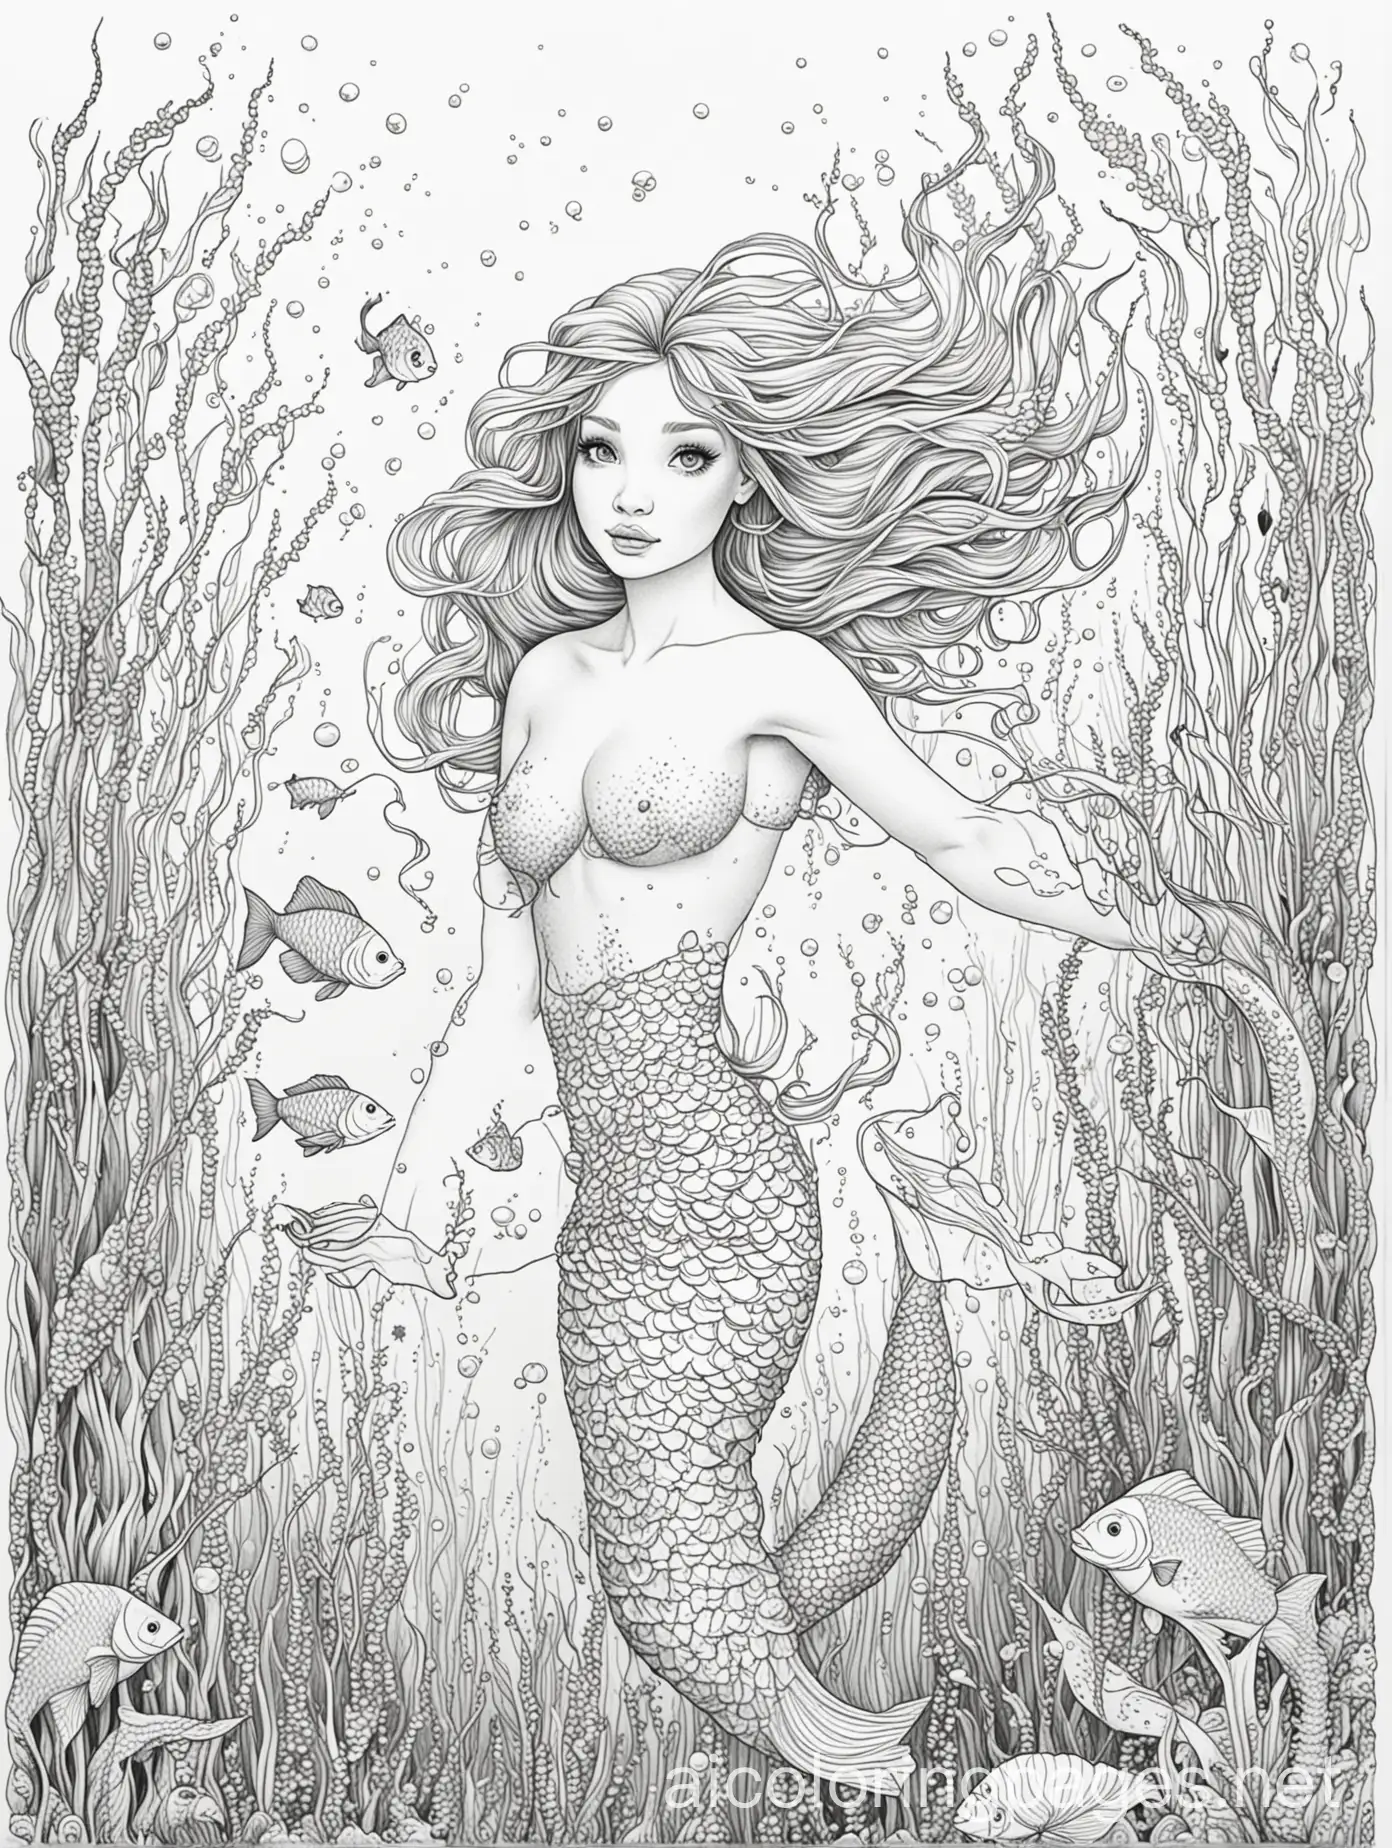 mermaid swimming through seaweed with fish, Coloring Page, black and white, line art, white background, Simplicity, Ample White Space. The background of the coloring page is plain white to make it easy for young children to color within the lines. The outlines of all the subjects are easy to distinguish, making it simple for kids to color without too much difficulty